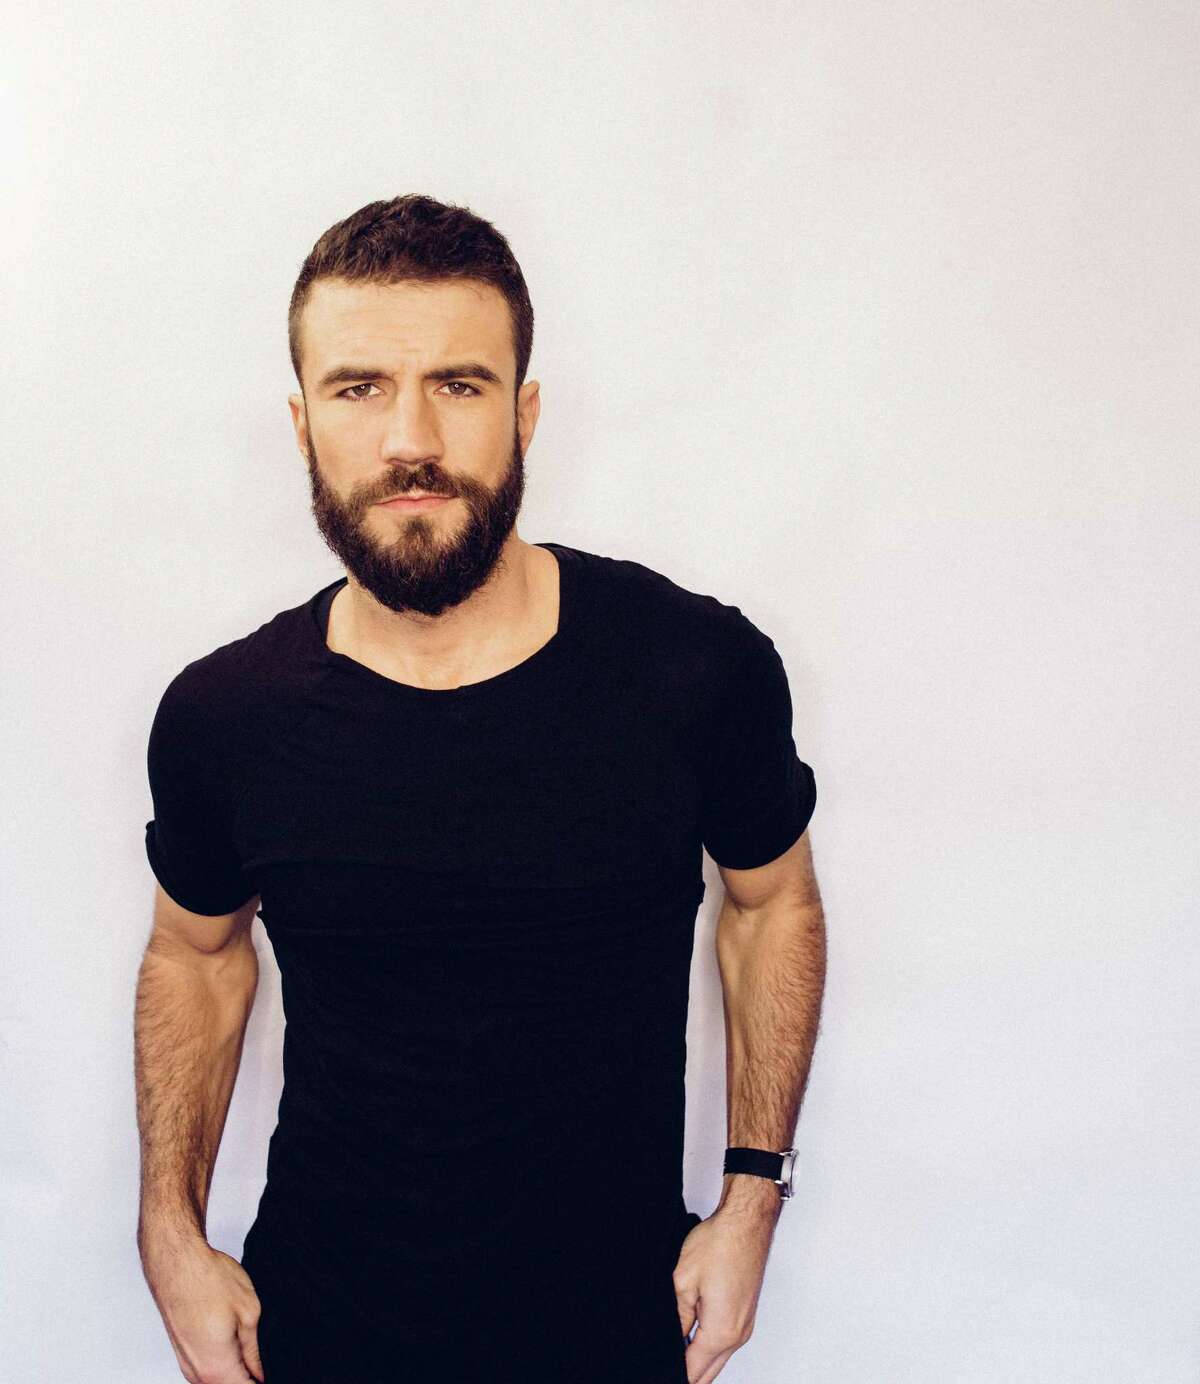 Sam Hunt wrote songs for some of the big names in country music before going solo.